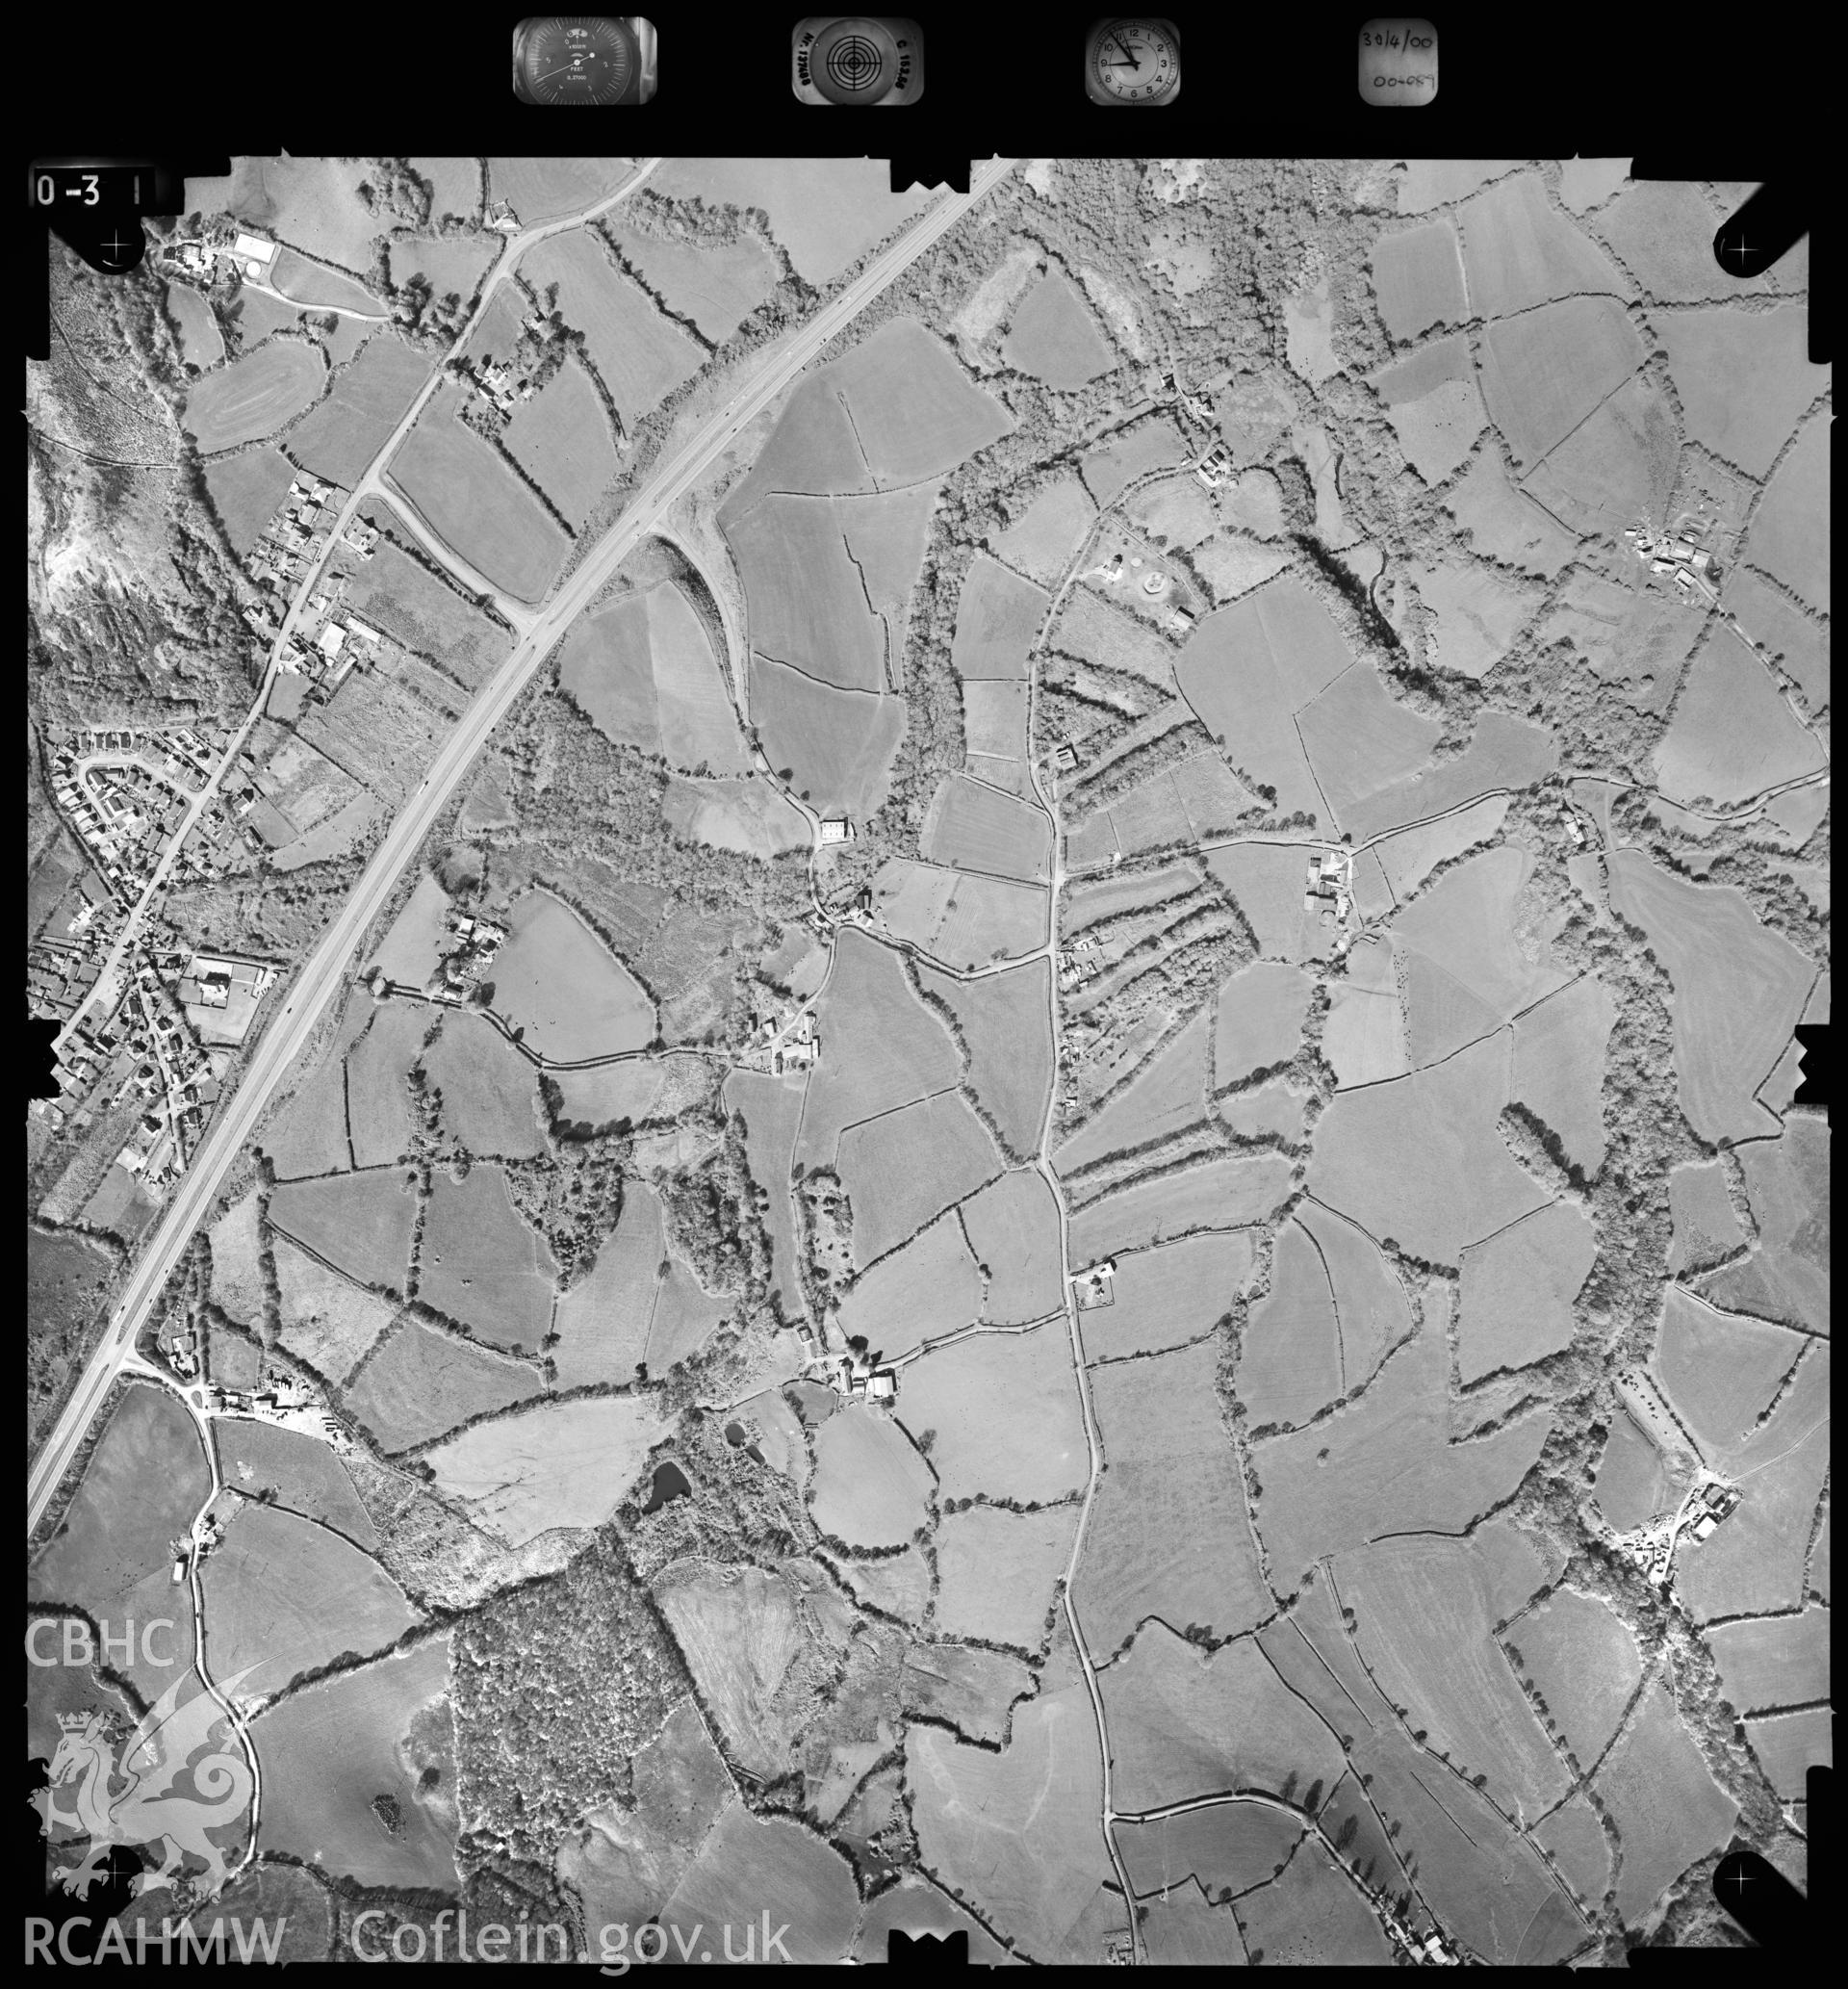 Digitized copy of an aerial photograph showing Foelgastell area, taken by Ordnance Survey, 2000.